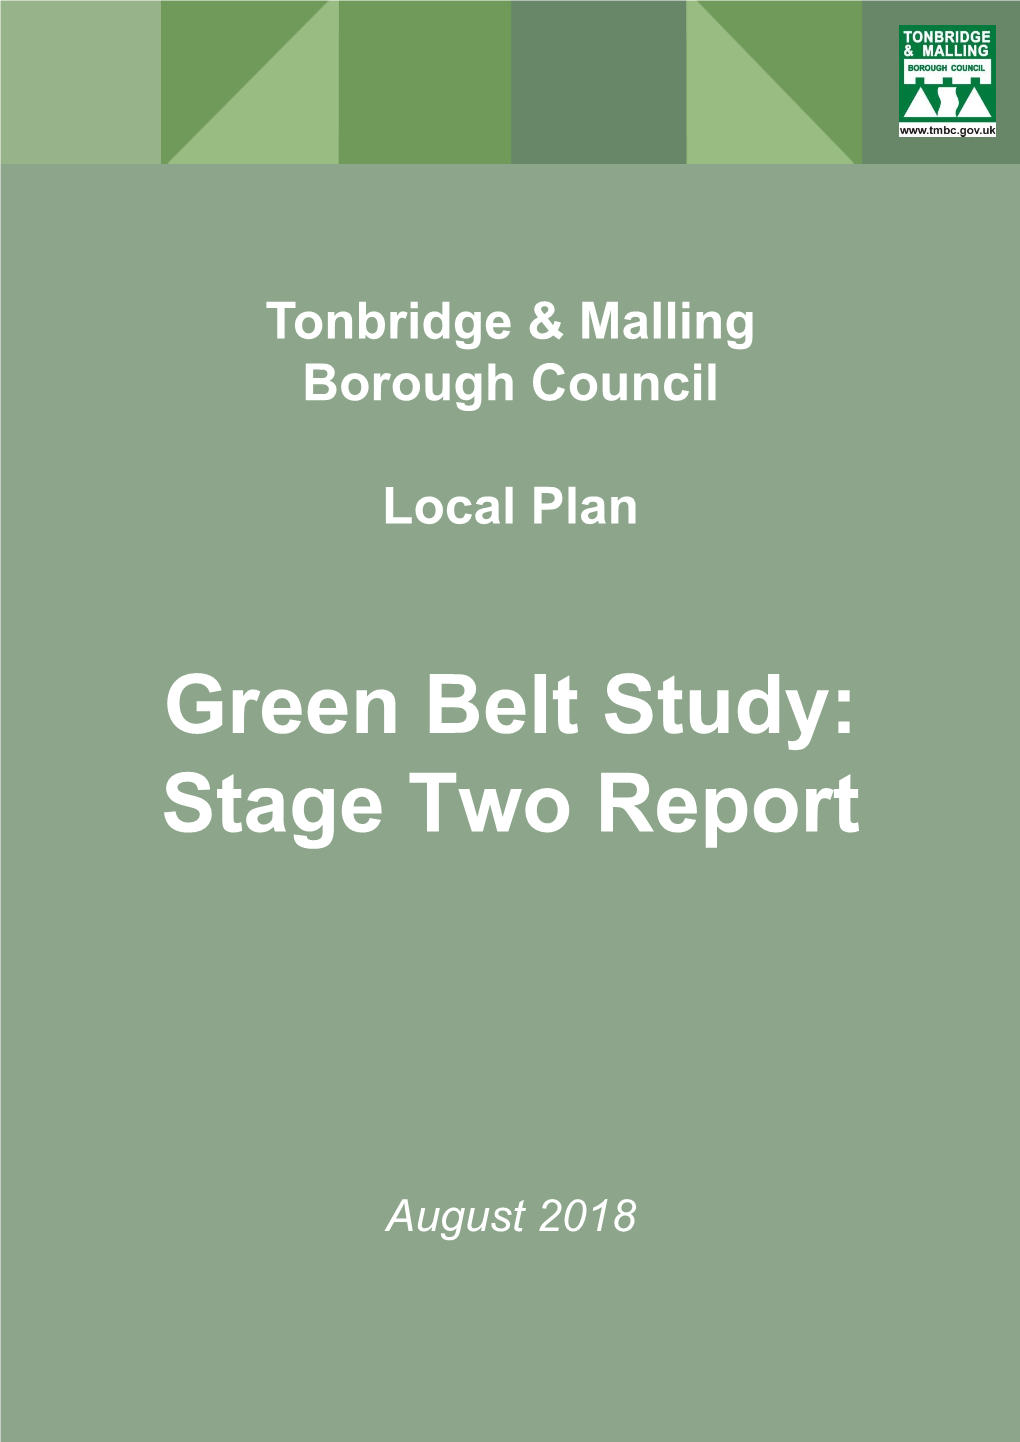 Green Belt Study Stage Two Report (August 2018)